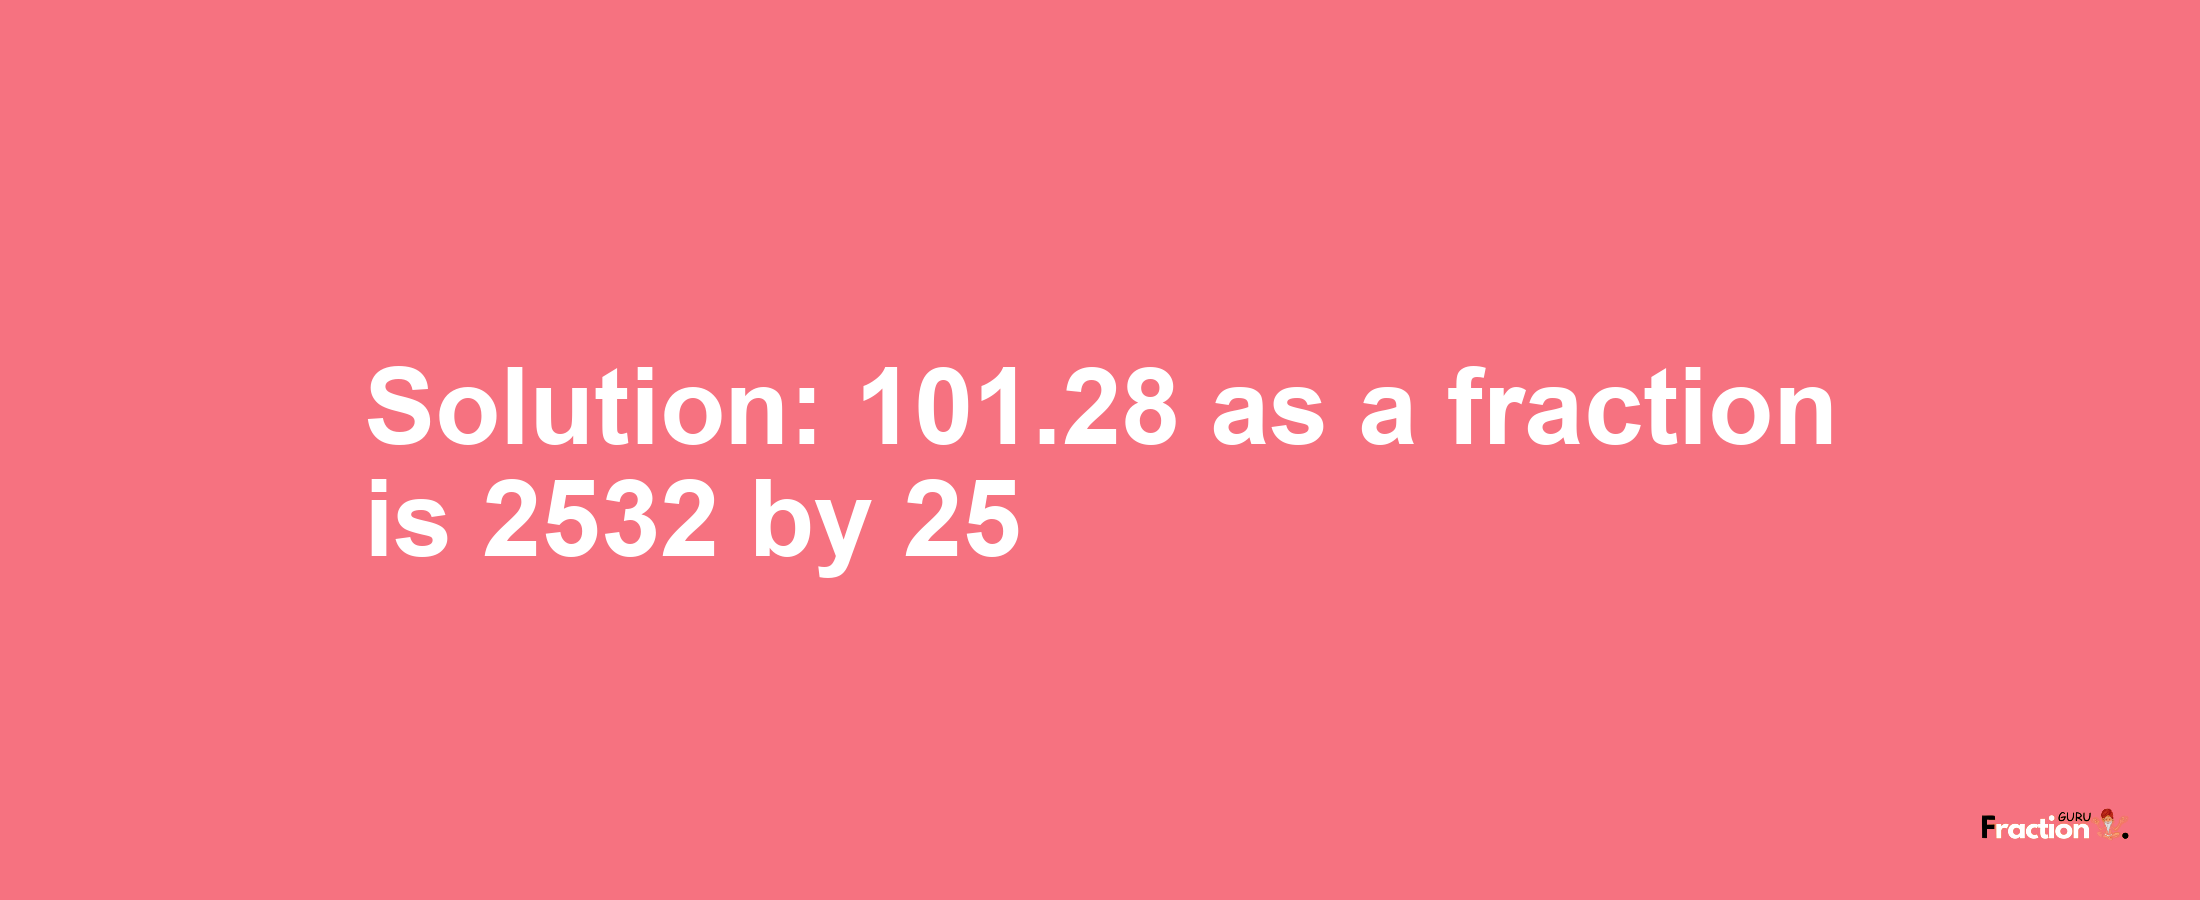 Solution:101.28 as a fraction is 2532/25